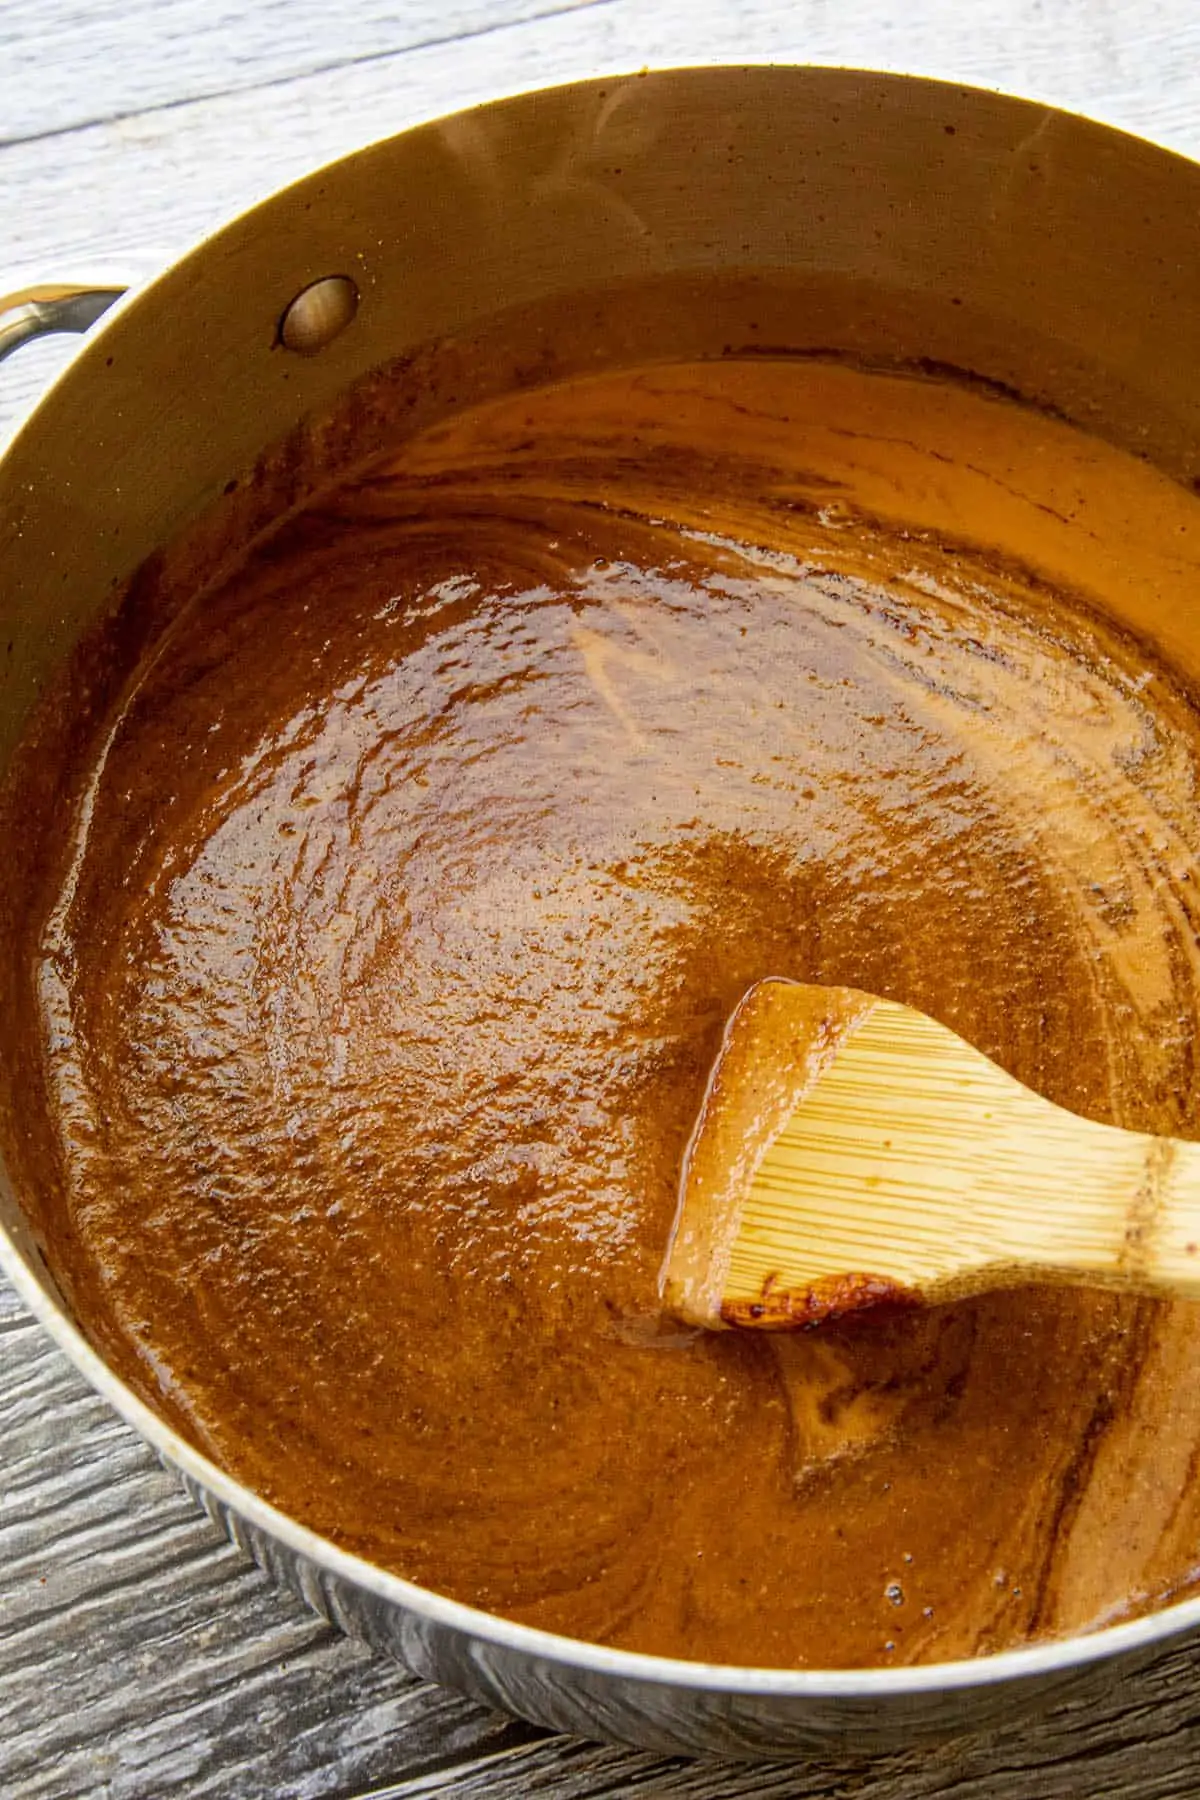 Swirling chocolate into the pot of mole sauce